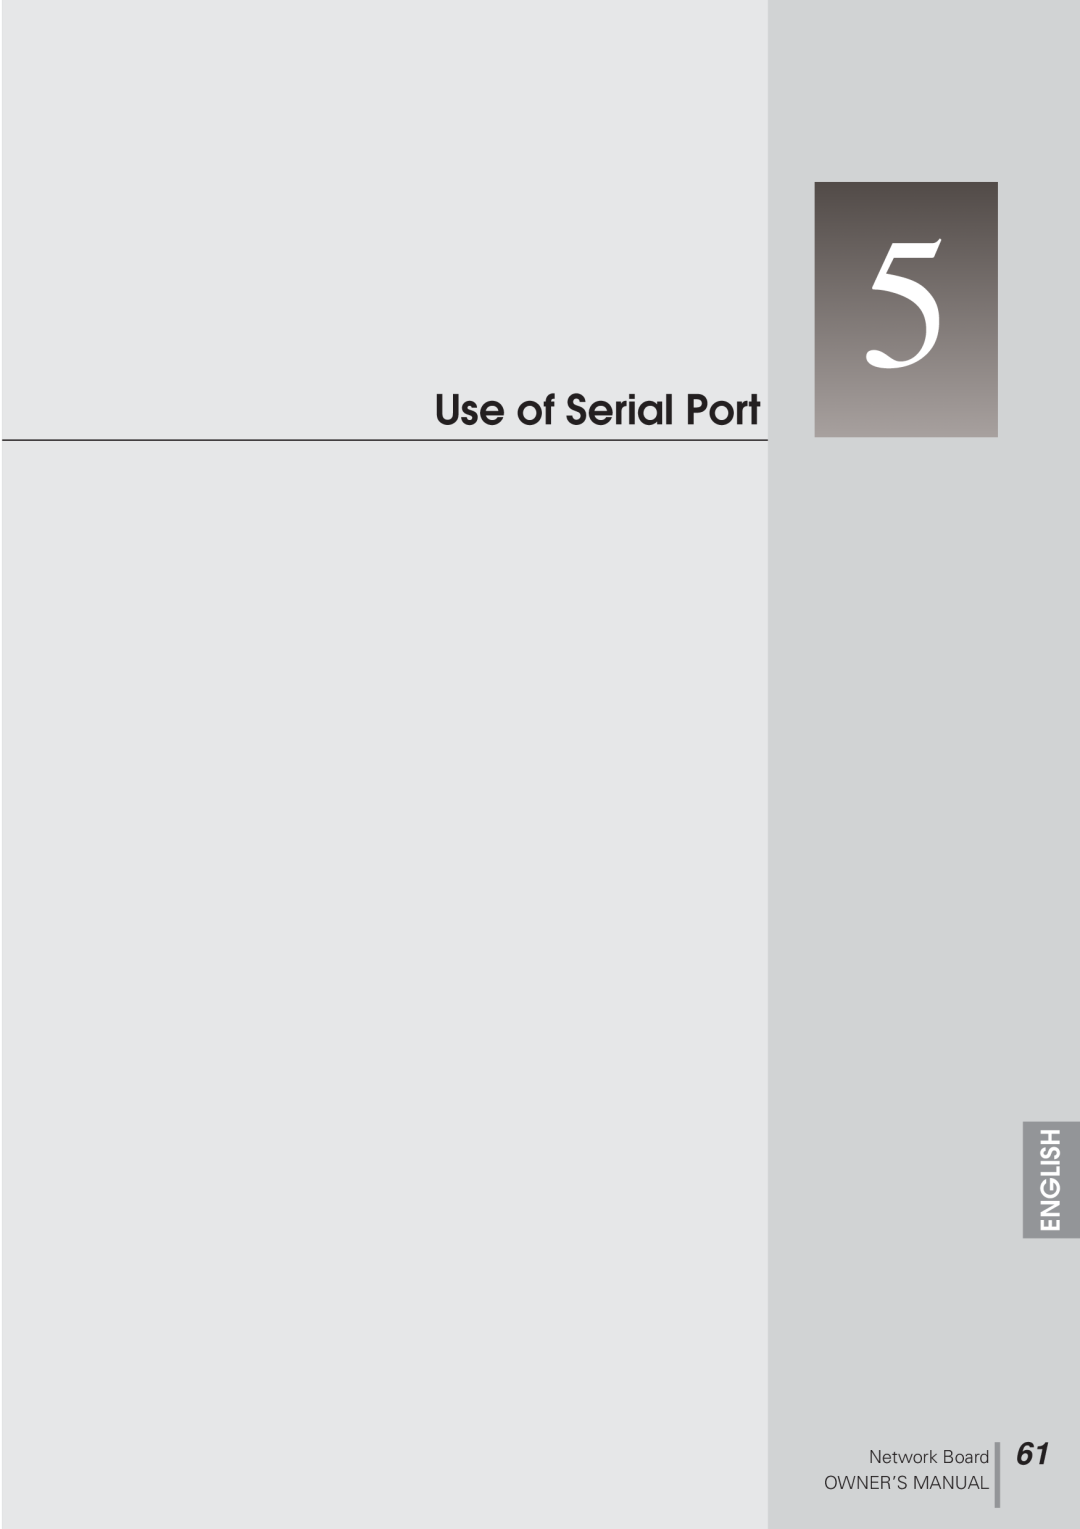 Eiki MD13NET owner manual Use of Serial Port, English 